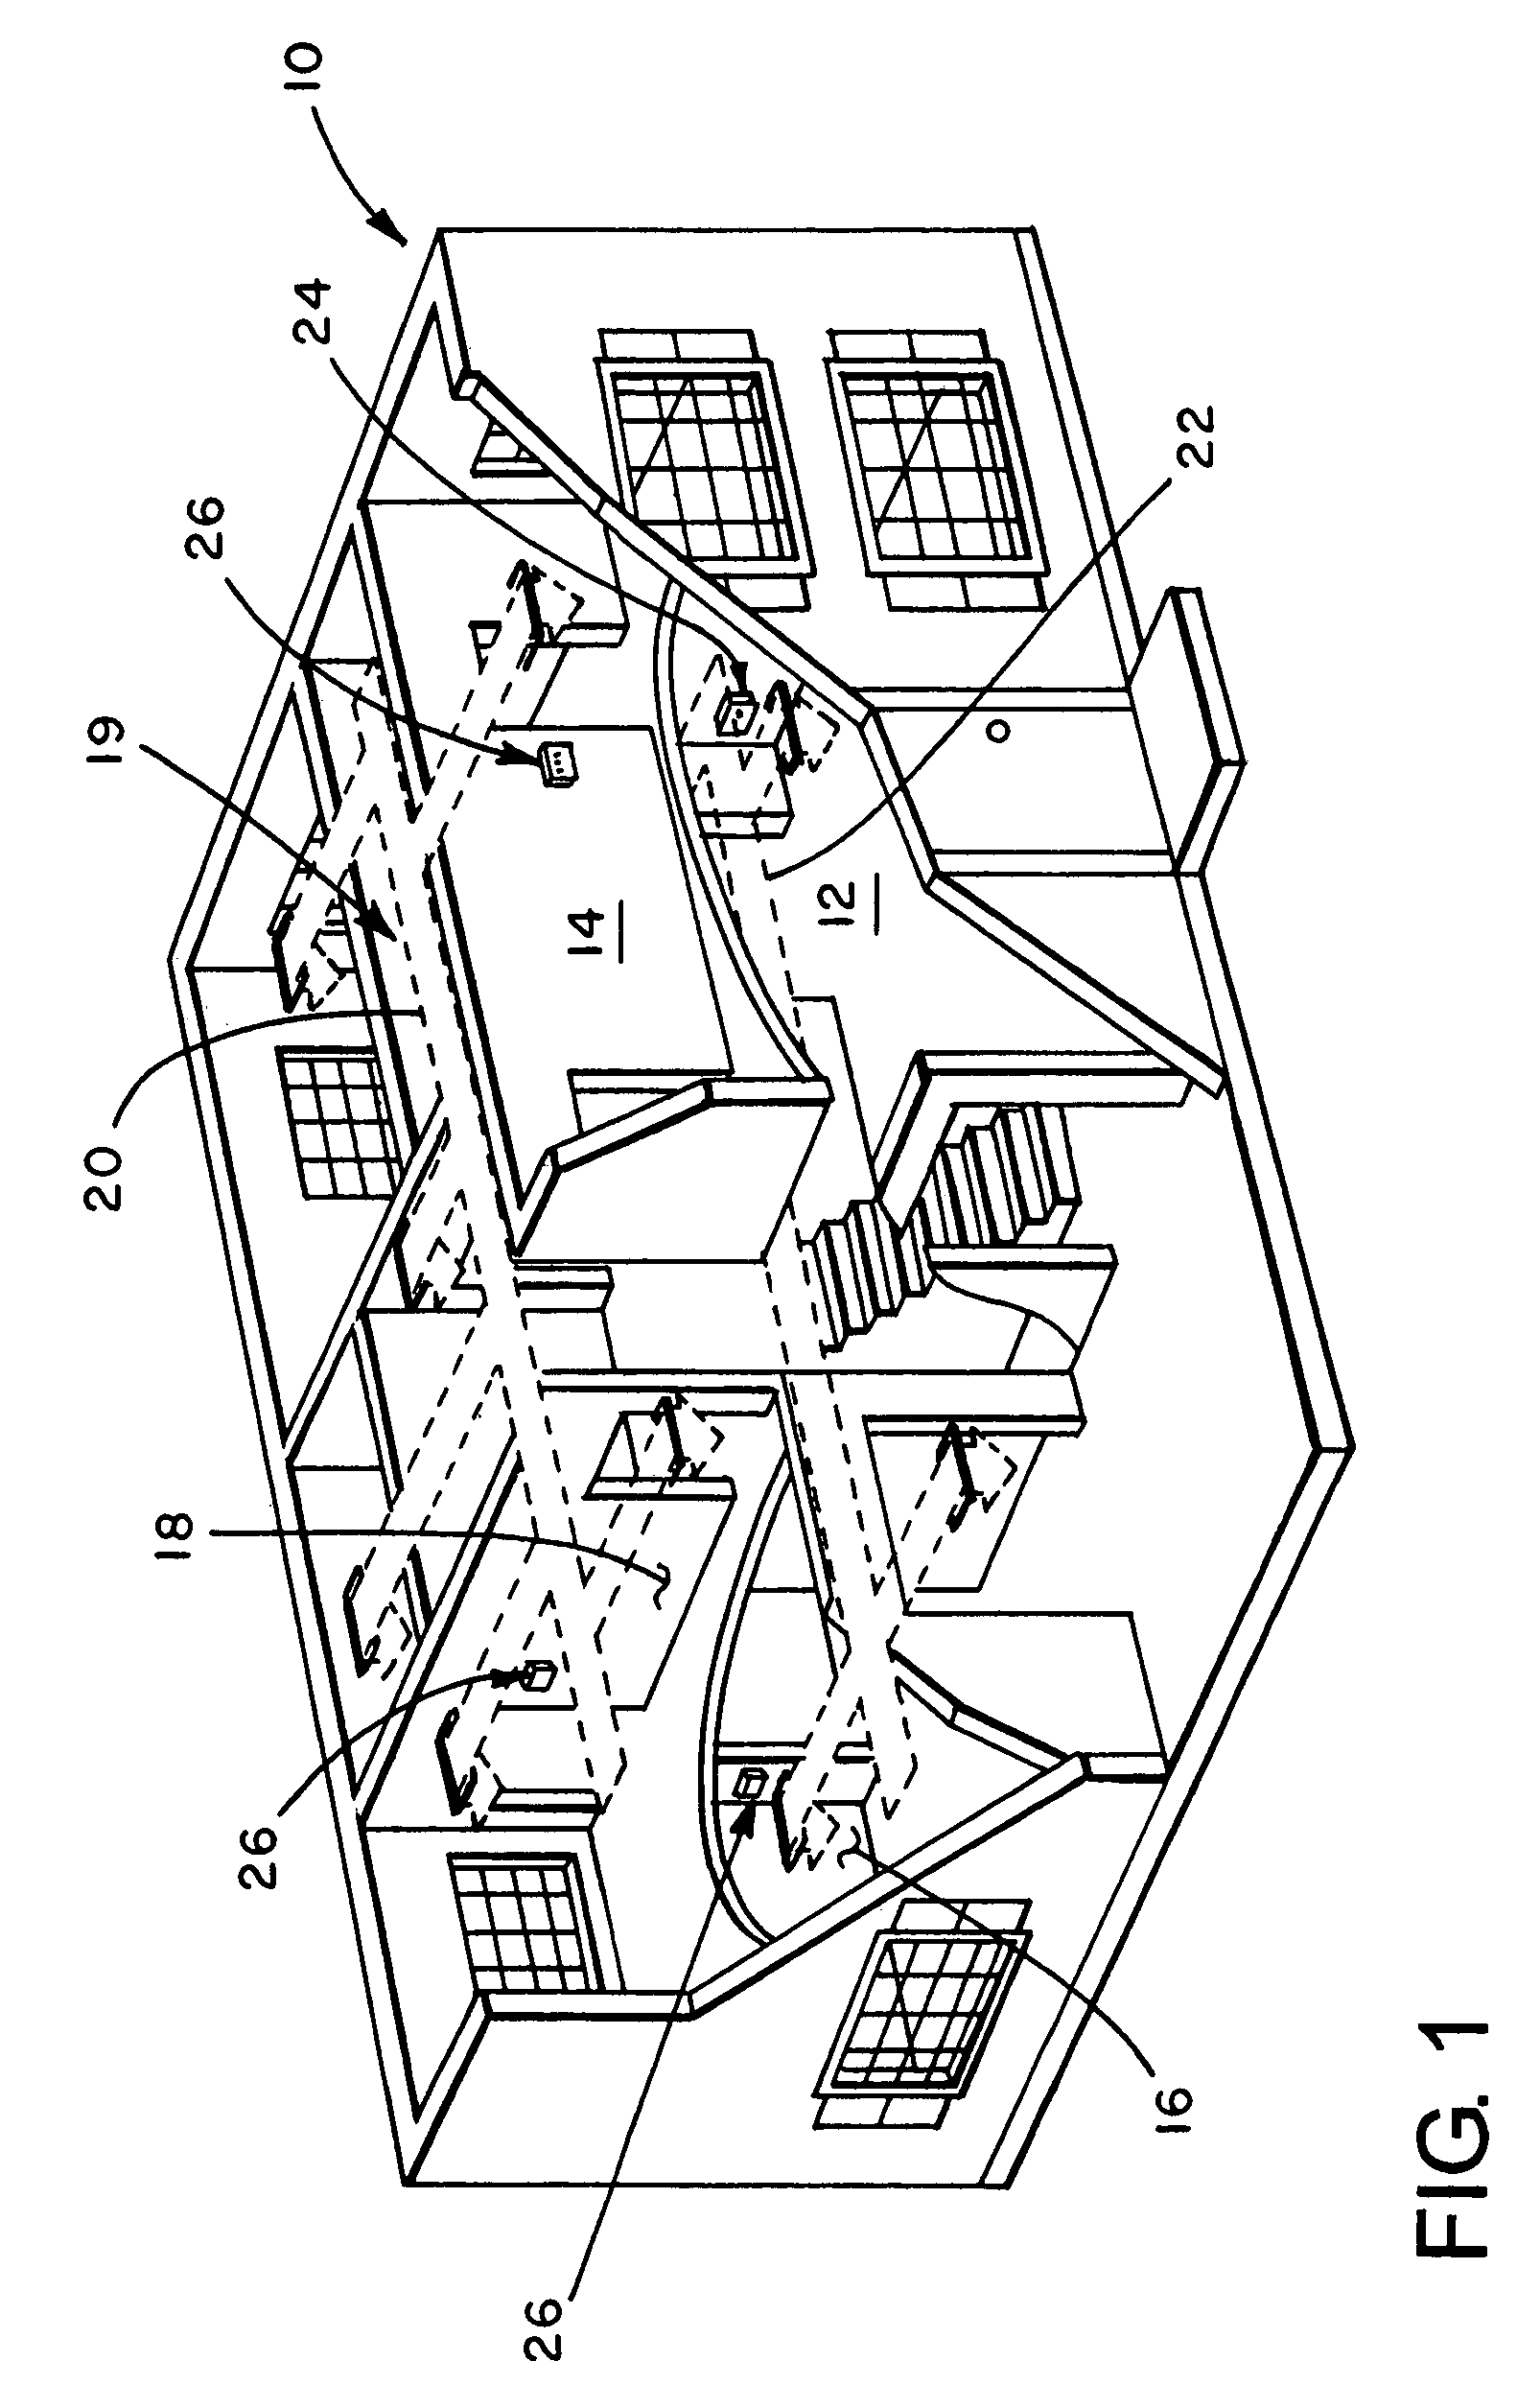 Multiple thermostats for air conditioning system with time setting feature